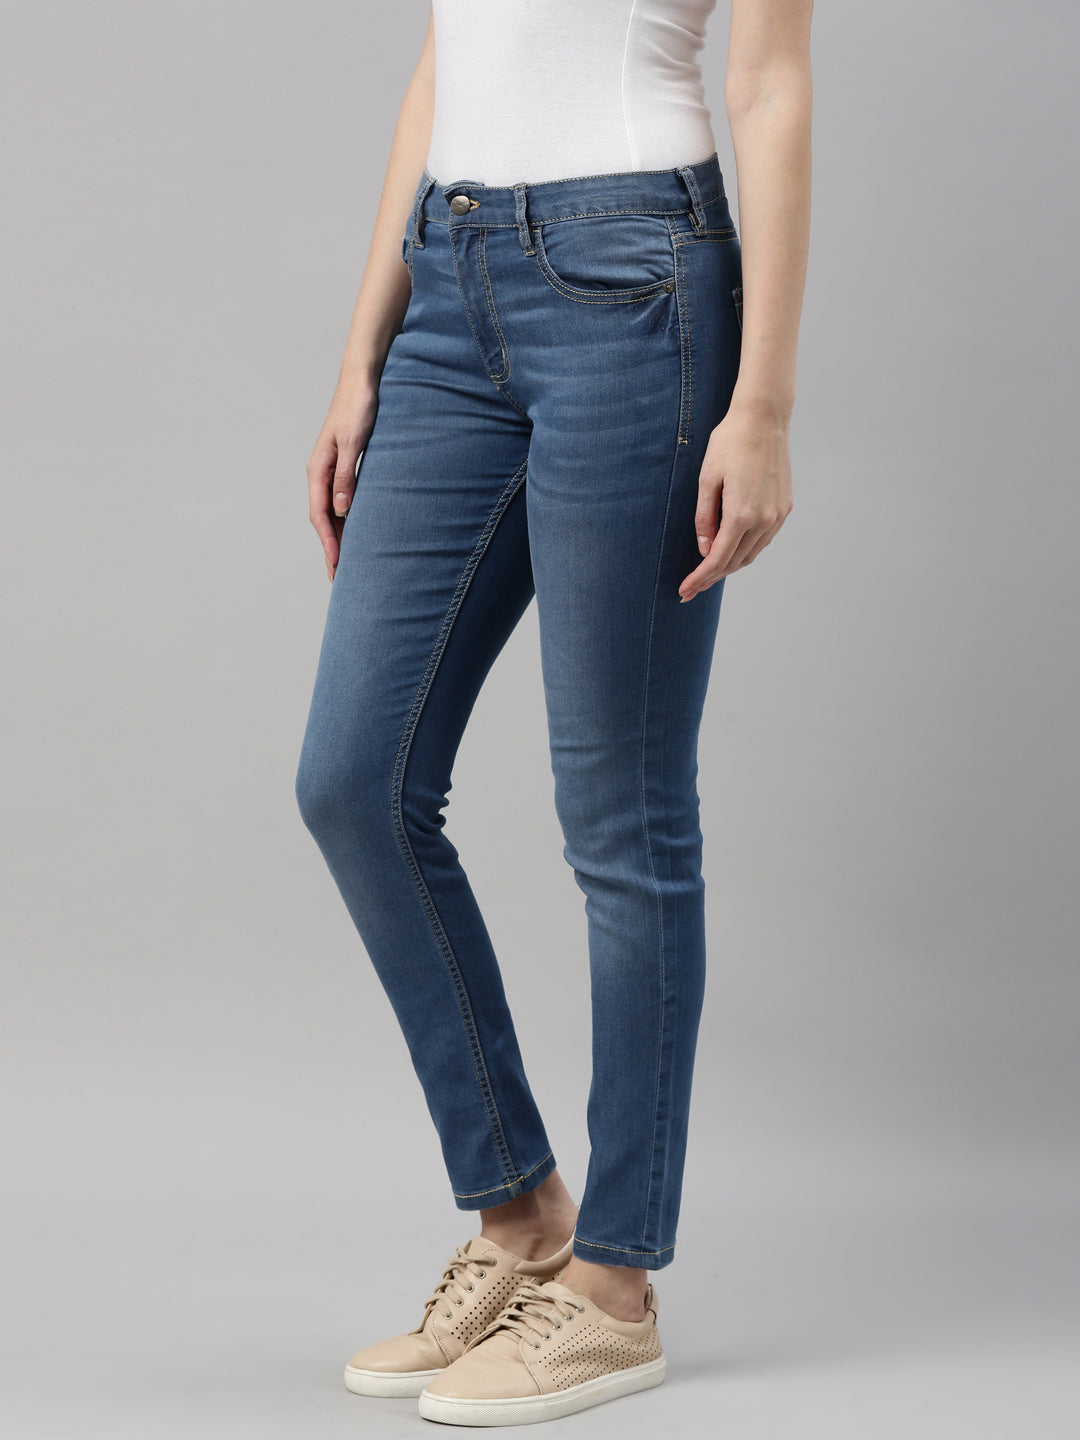 Shop Womens Solid Light Blue High Rise Skinny Jeans Online  Go Colors